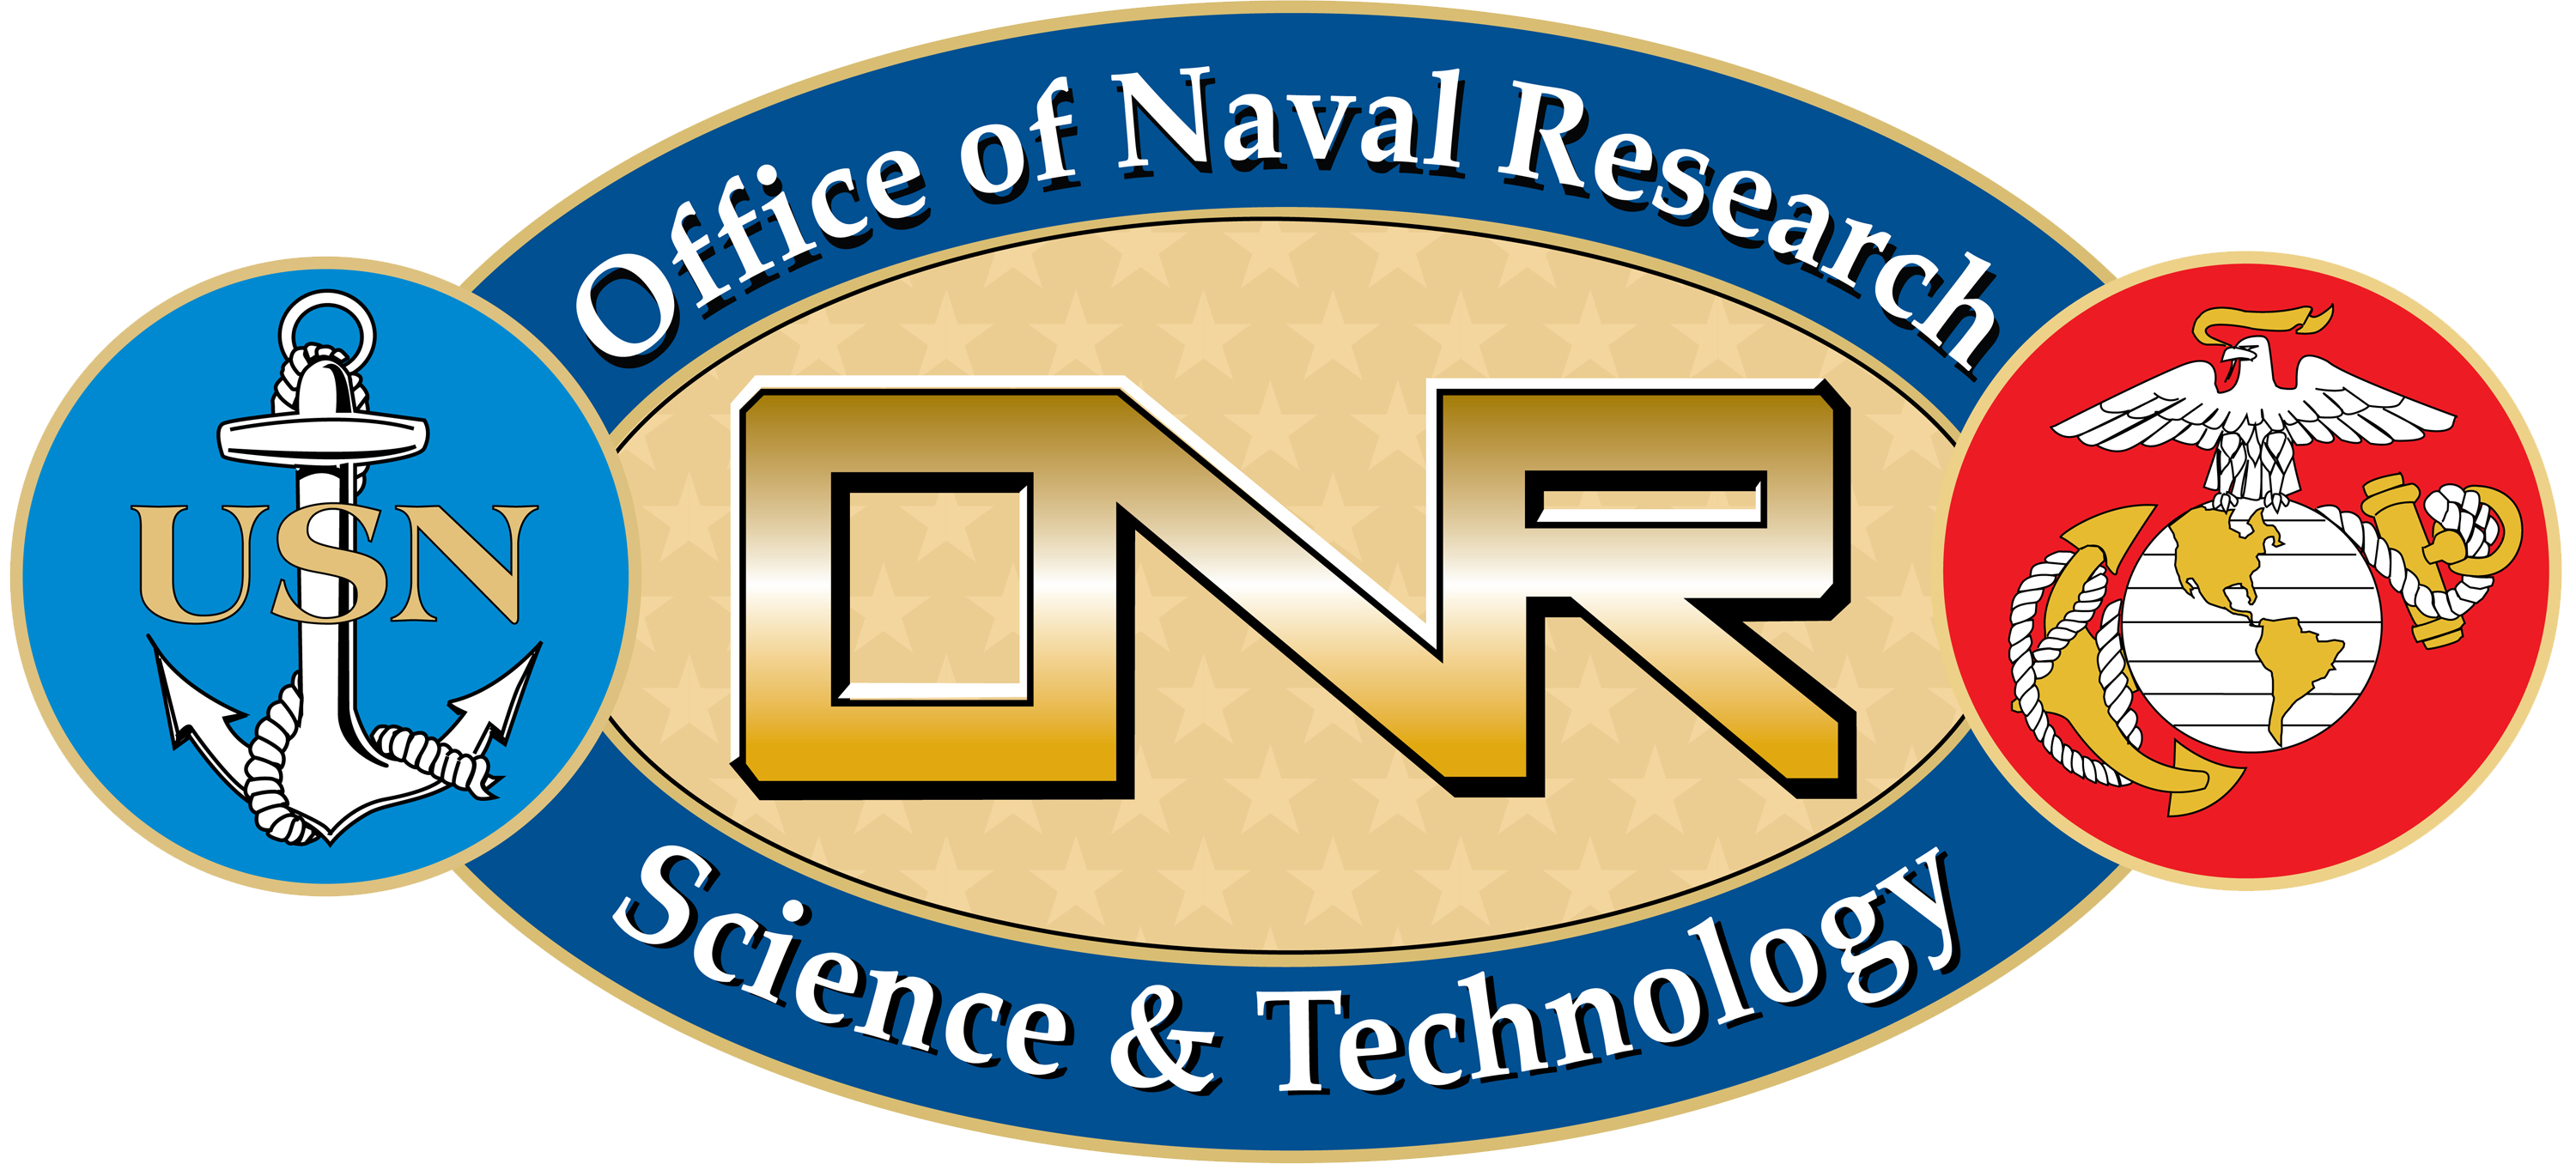 Office of Naval Research (ONR) Science & Technology